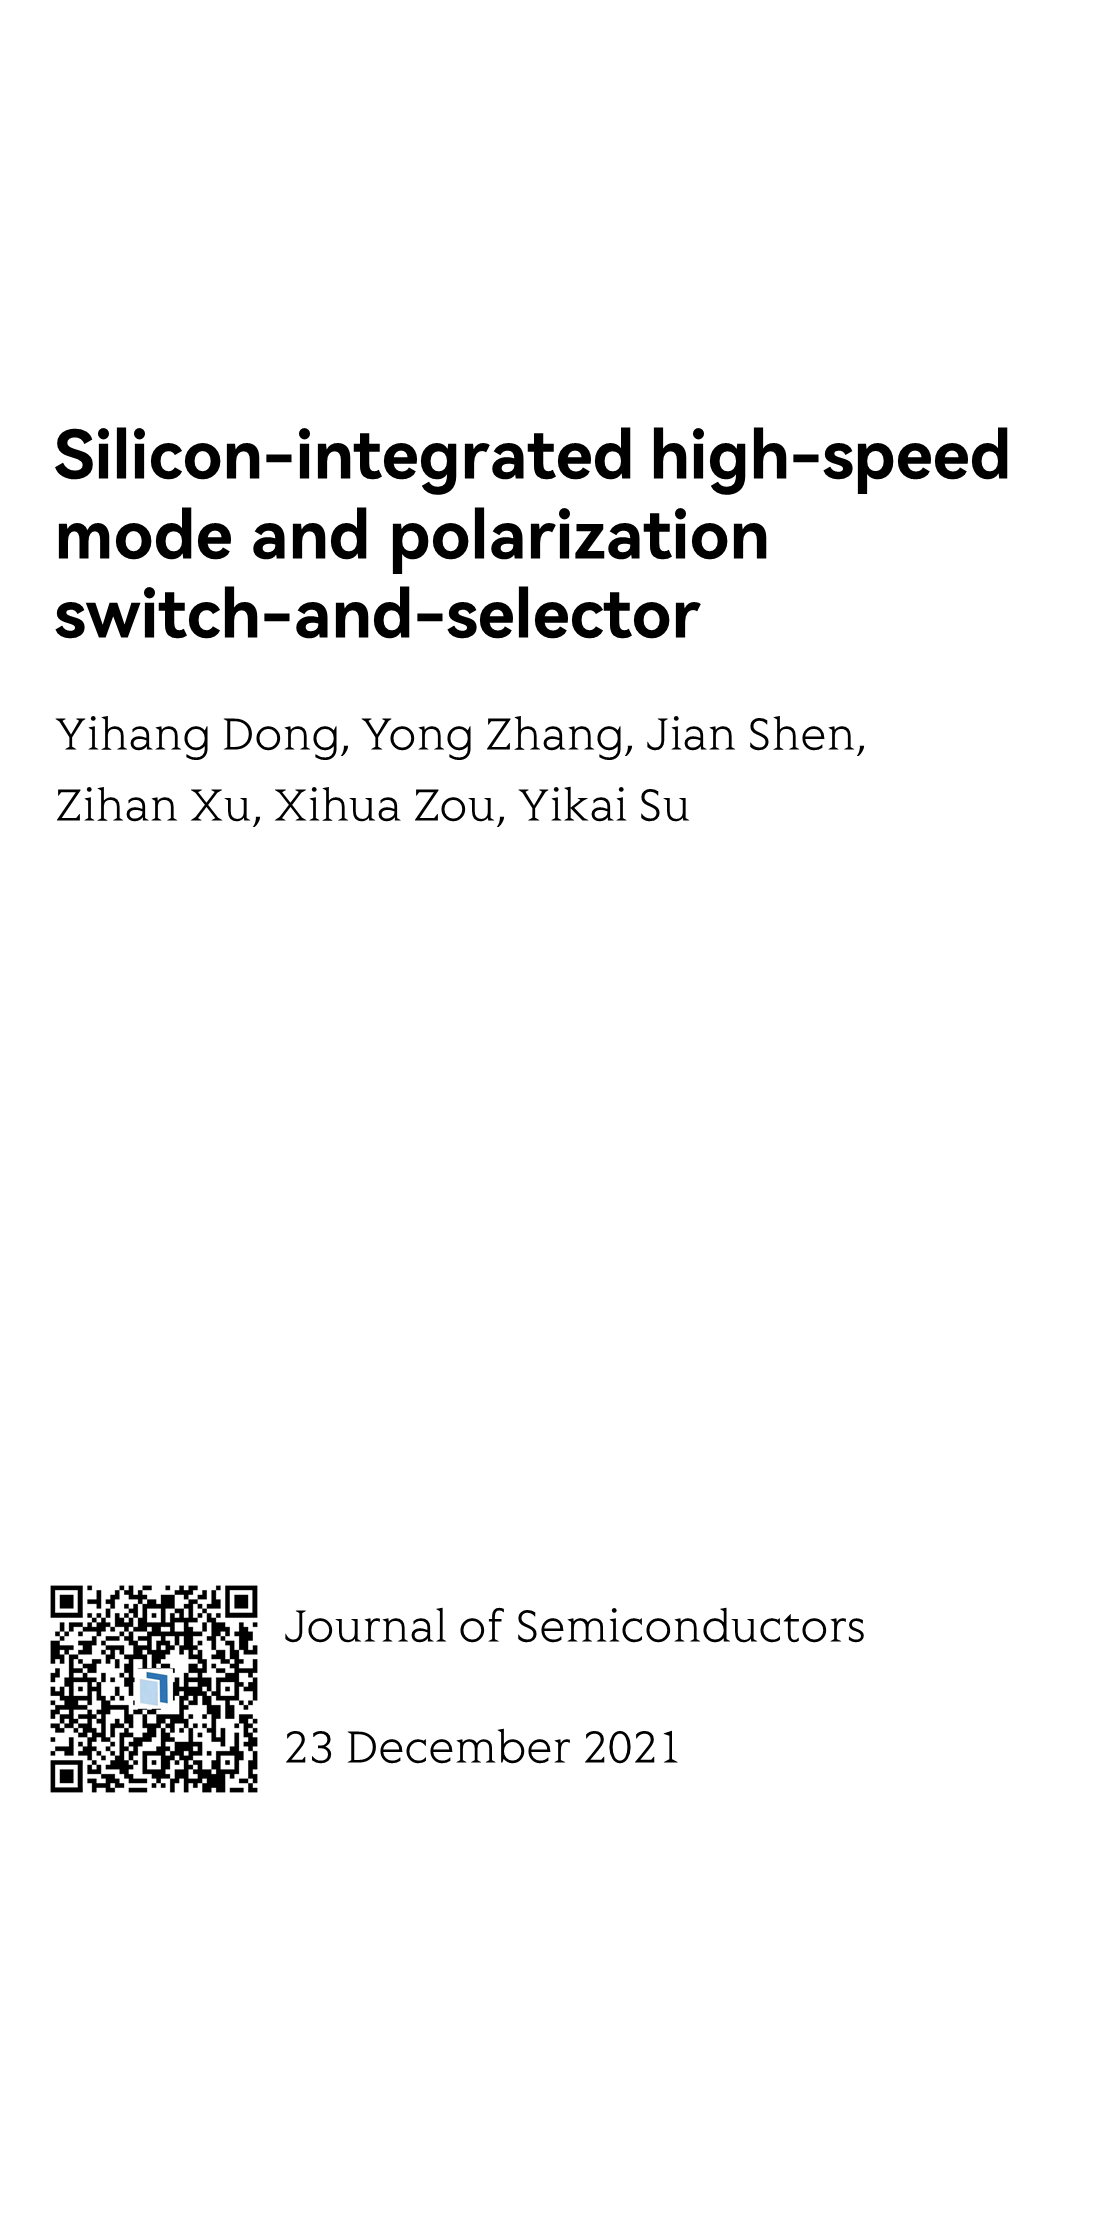 Journal of Semiconductors_1